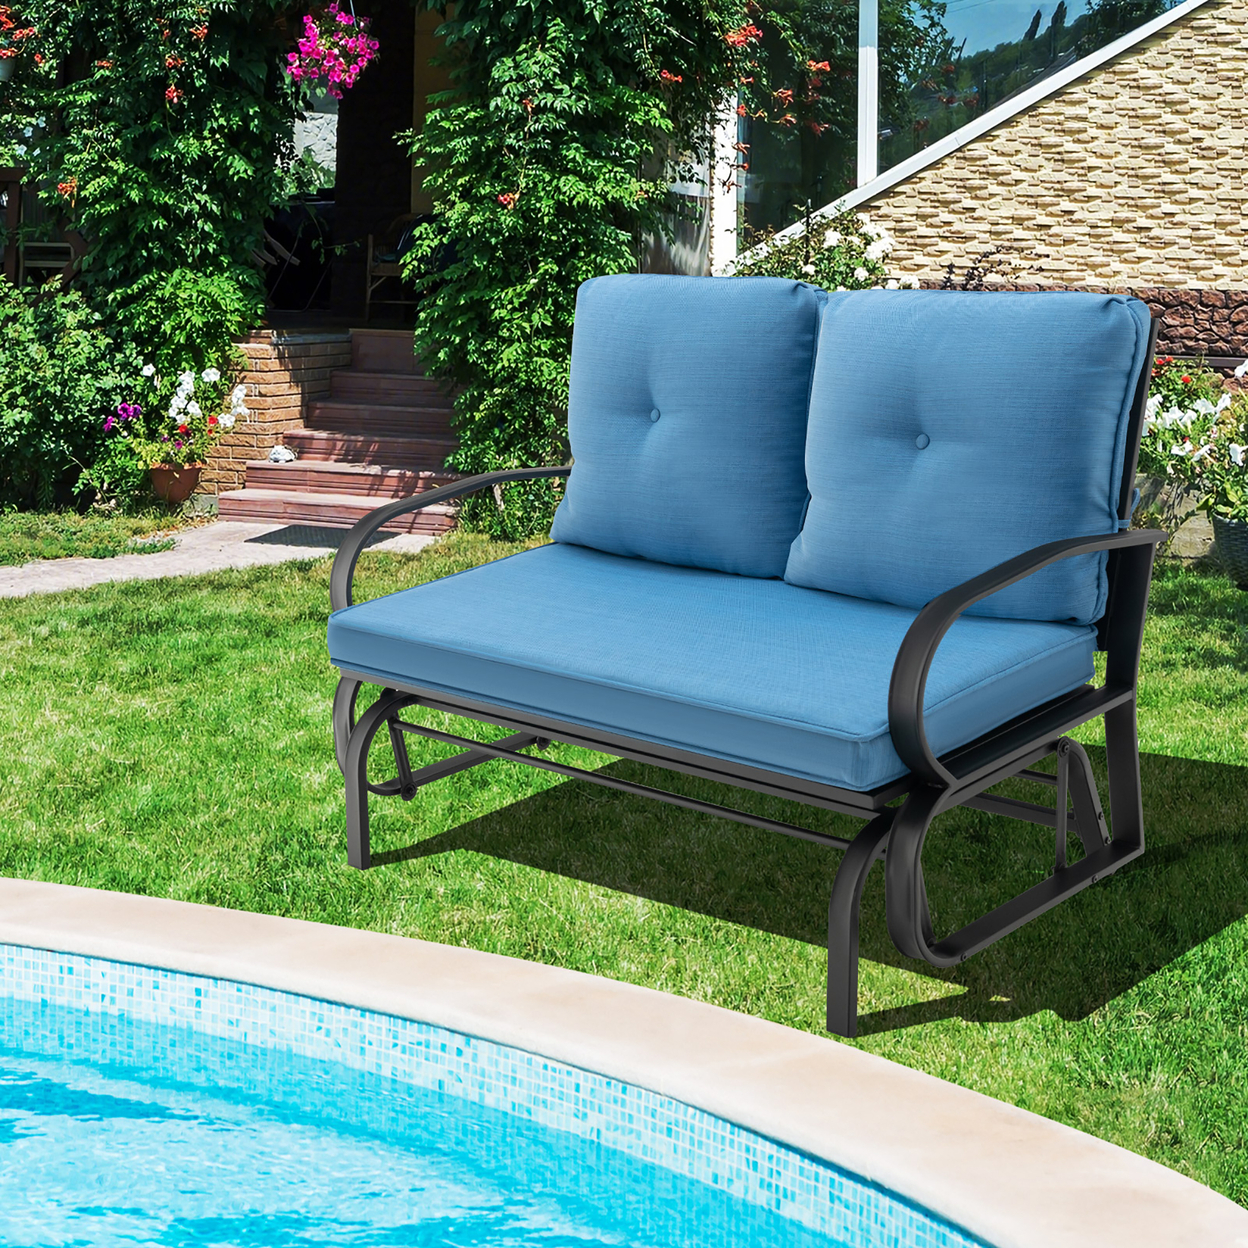 2-Person Outdoor Patio Glider Bench Swing Seat Bench W/ Seat & Back Cushions - Blue